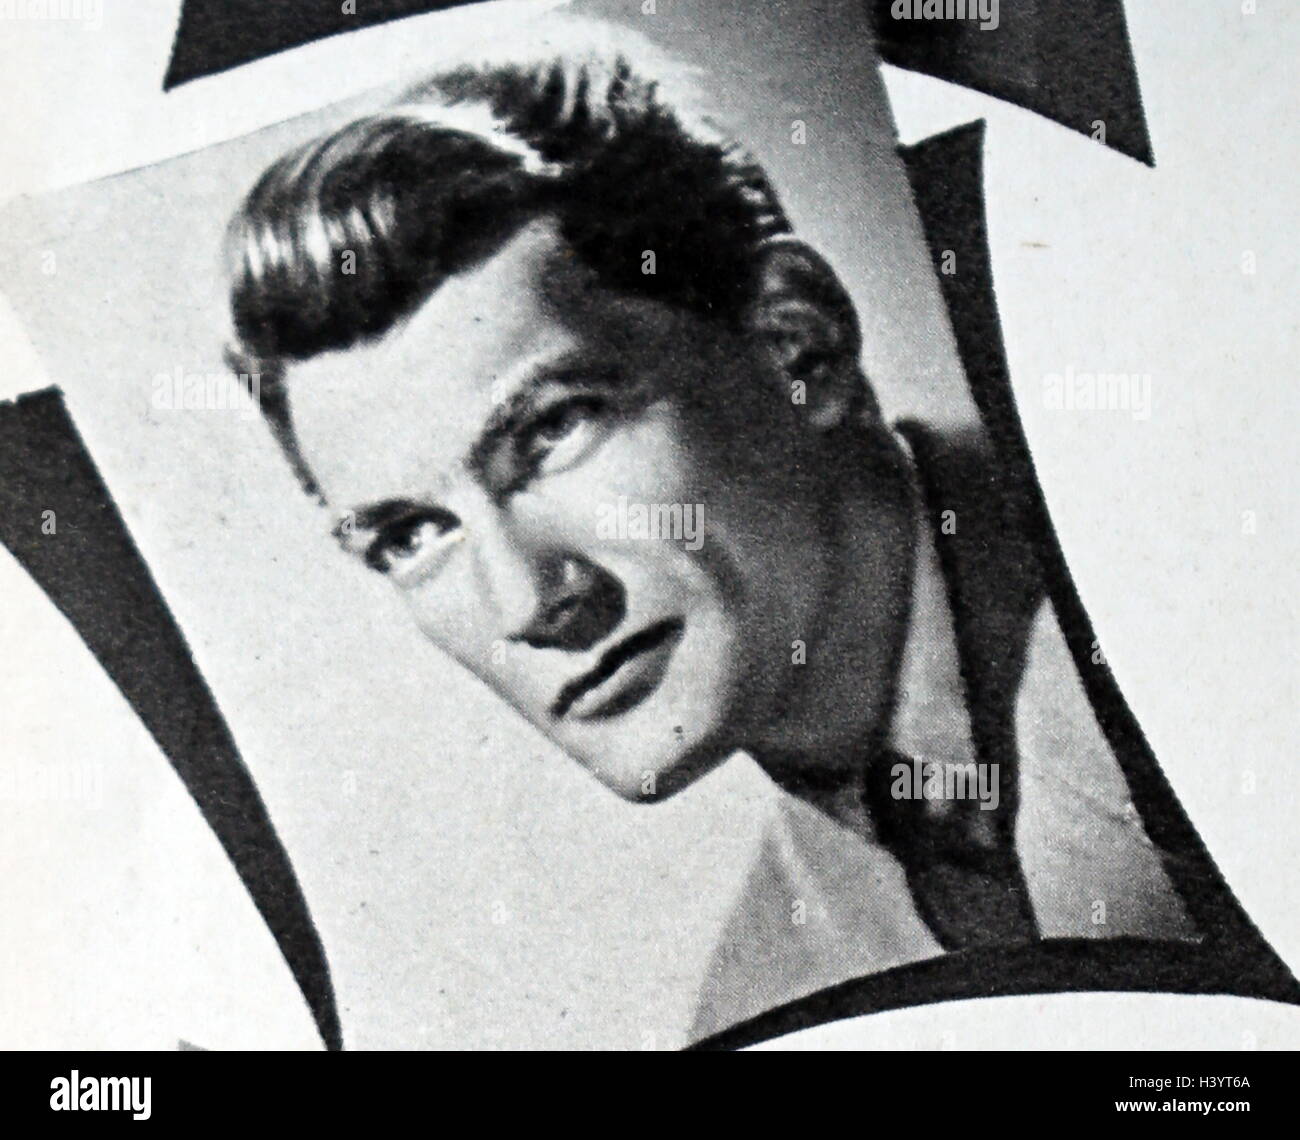 Photograph of Jean Marais (1913-1998) a French actor, writer, director and sculptor. Dated 20th Century Stock Photo